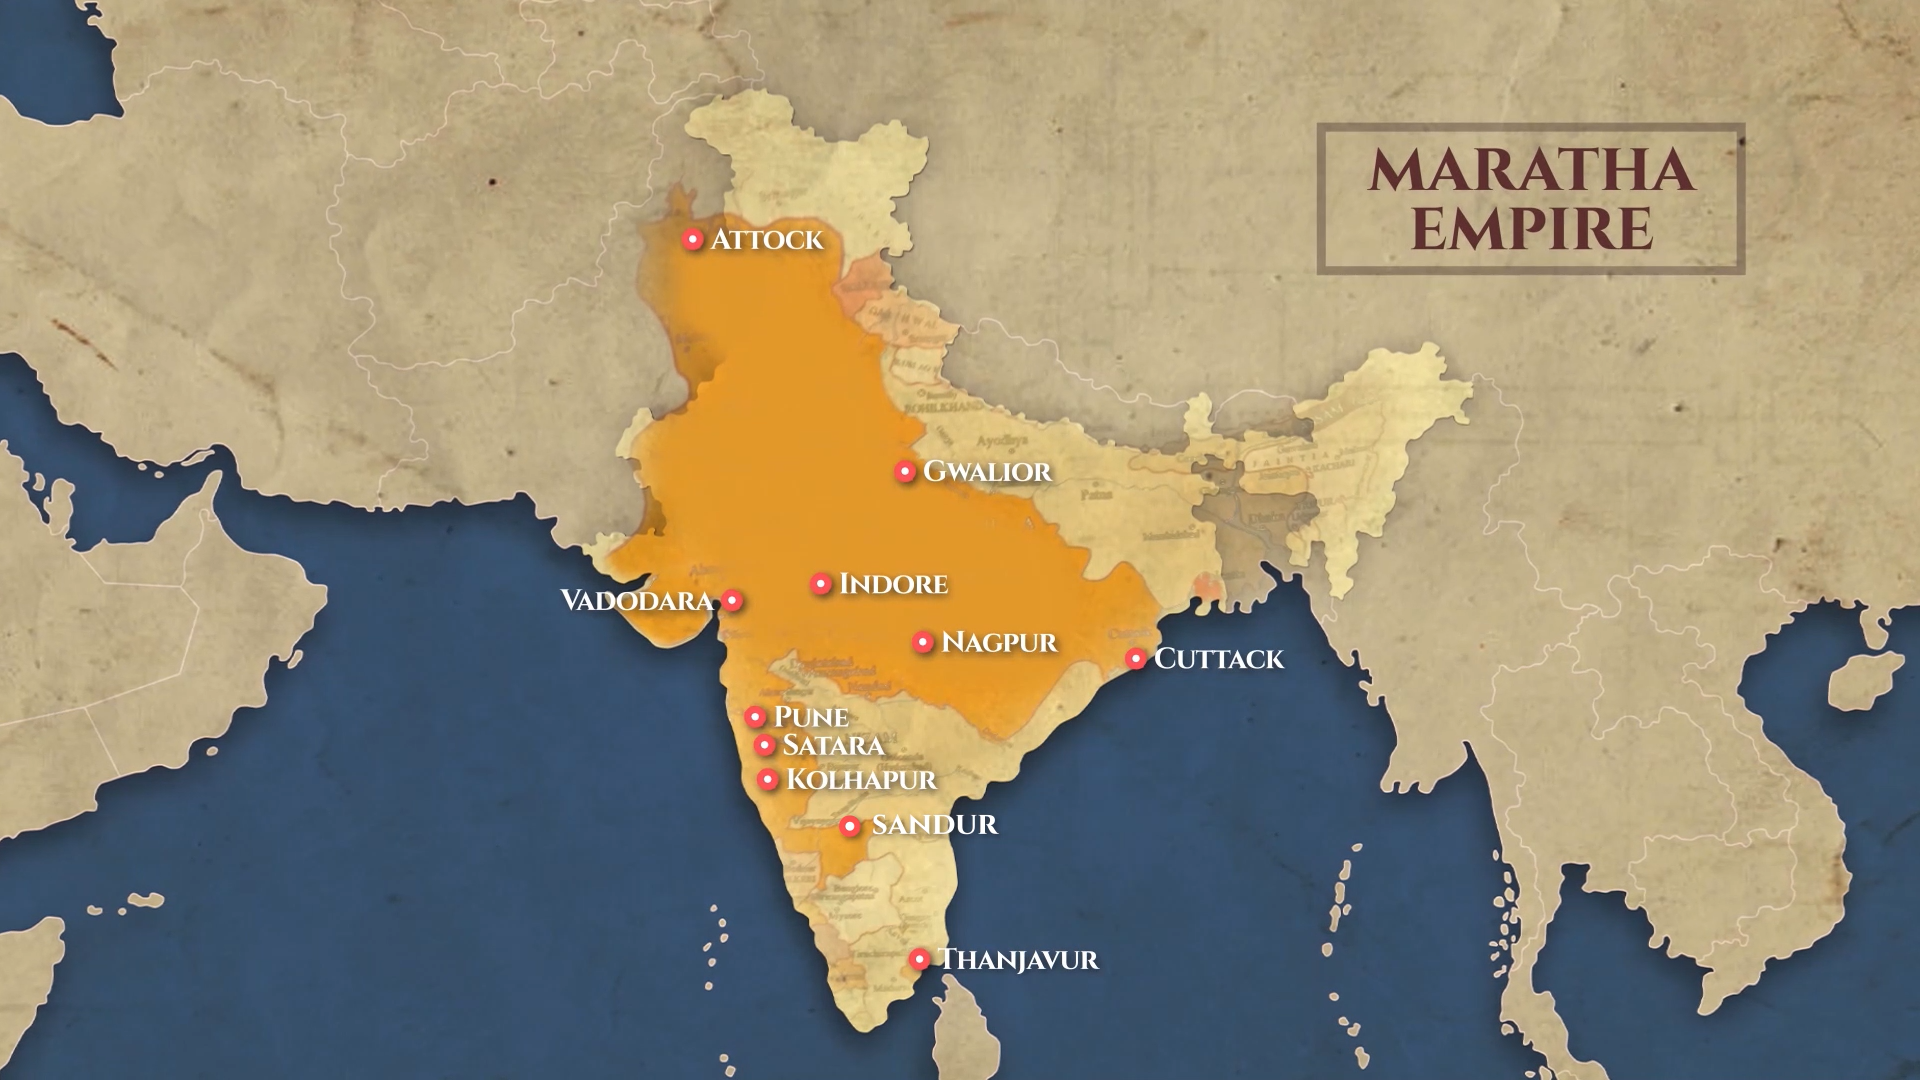 The extent of the Maratha Empire